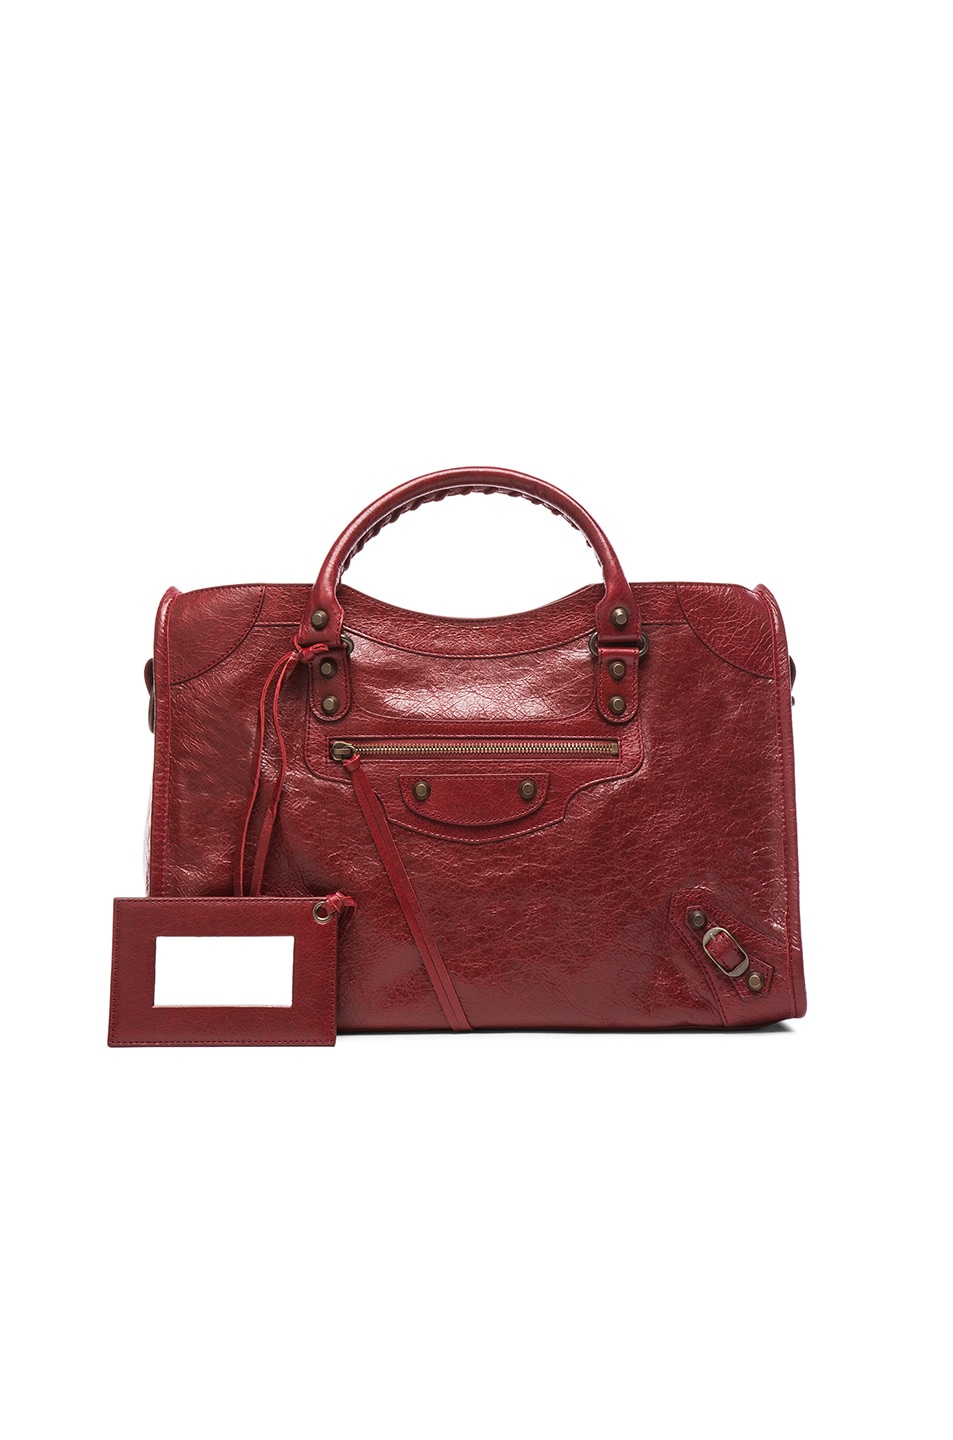 Image 1 of Balenciaga Classic City Bag with Traditional Studs in Cherry Red